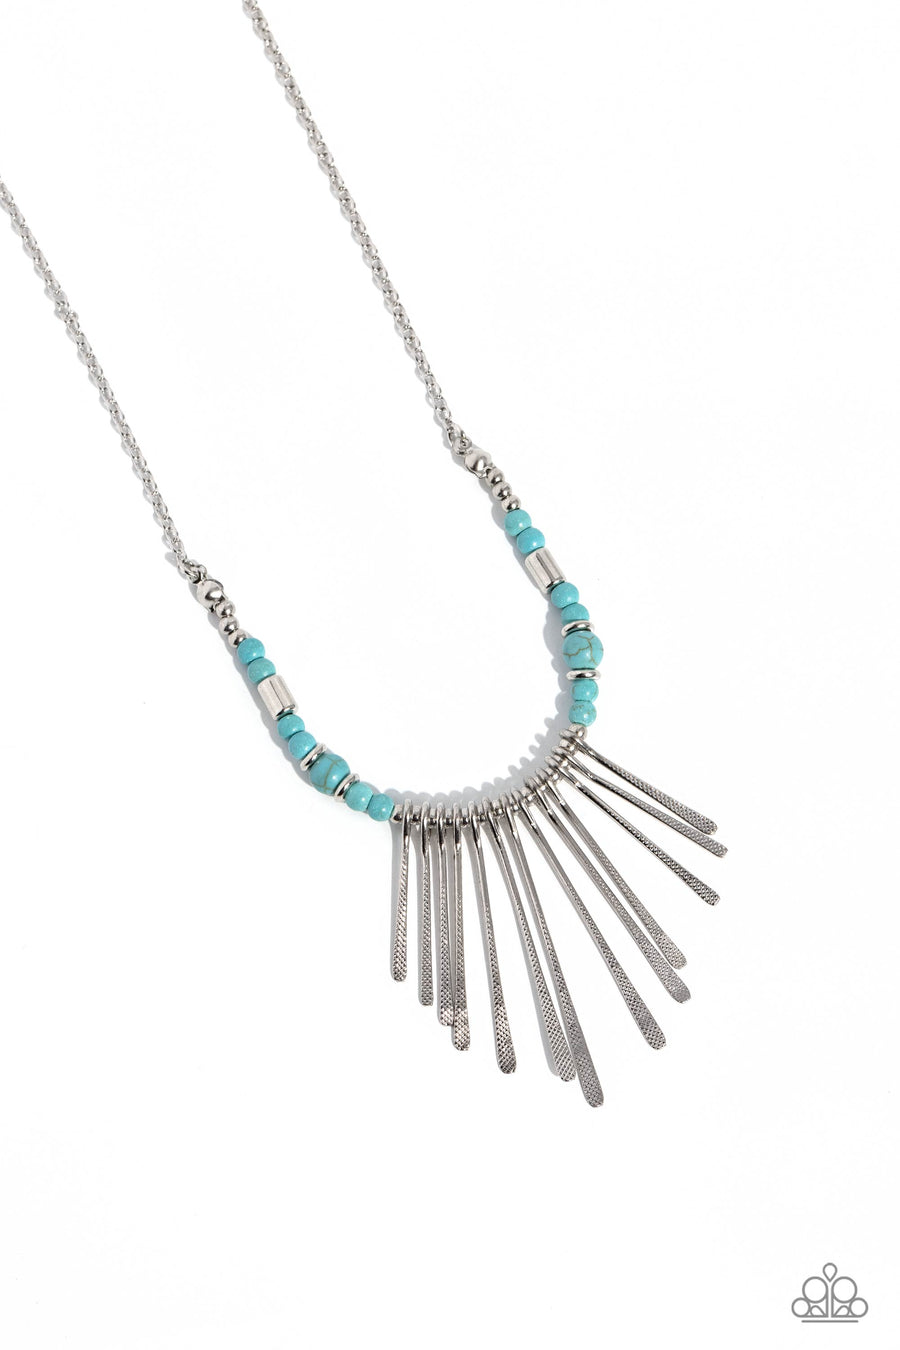 CLAWS of Nature - Blue and Silver Necklace - Paparazzi Accessories - Hammered in a dotted motif, a dainty row of silver rods shimmers along an invisible wire dotted in dainty silver and turquoise stone beads. Attached to a dainty silver chain, the tapered fringe flares out below the collar, resulting in an earthy edge.